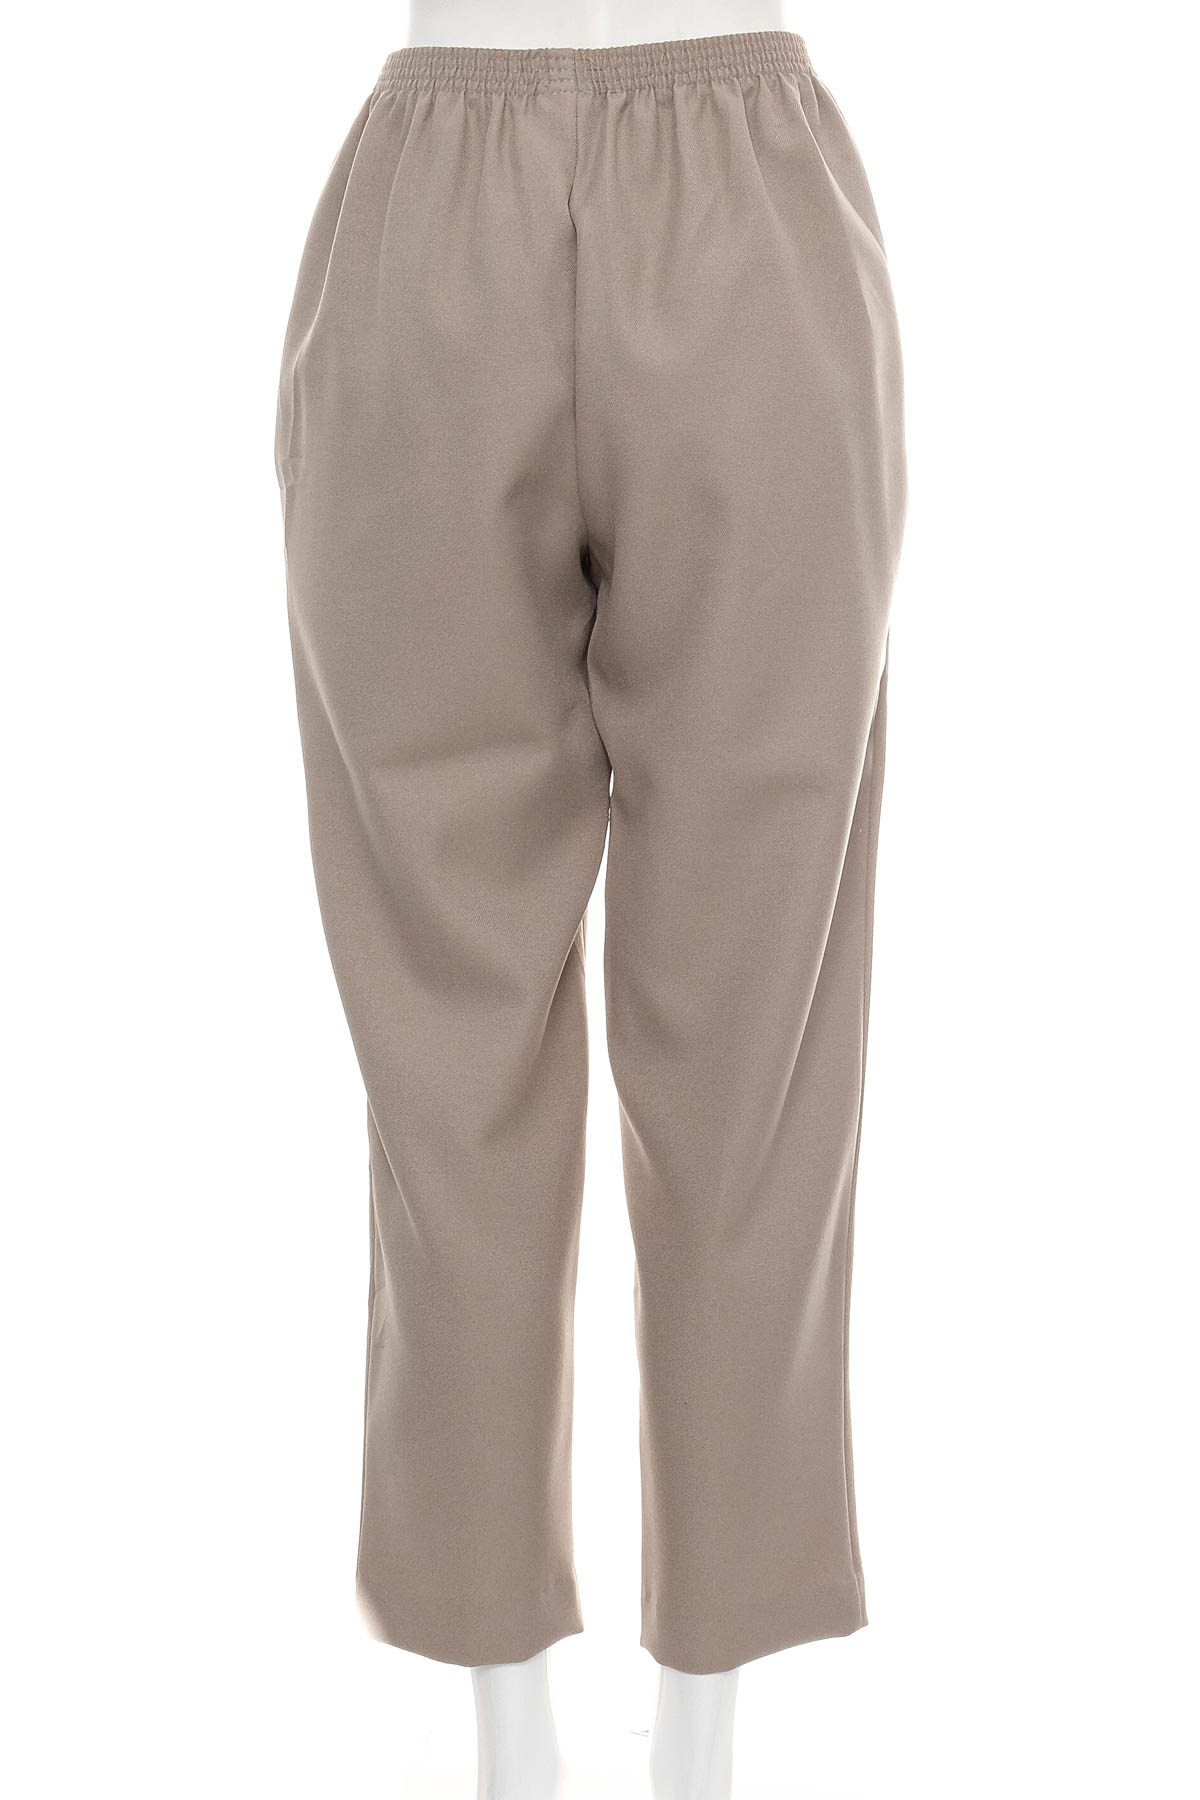 Women's trousers - Alfred dunner - 1